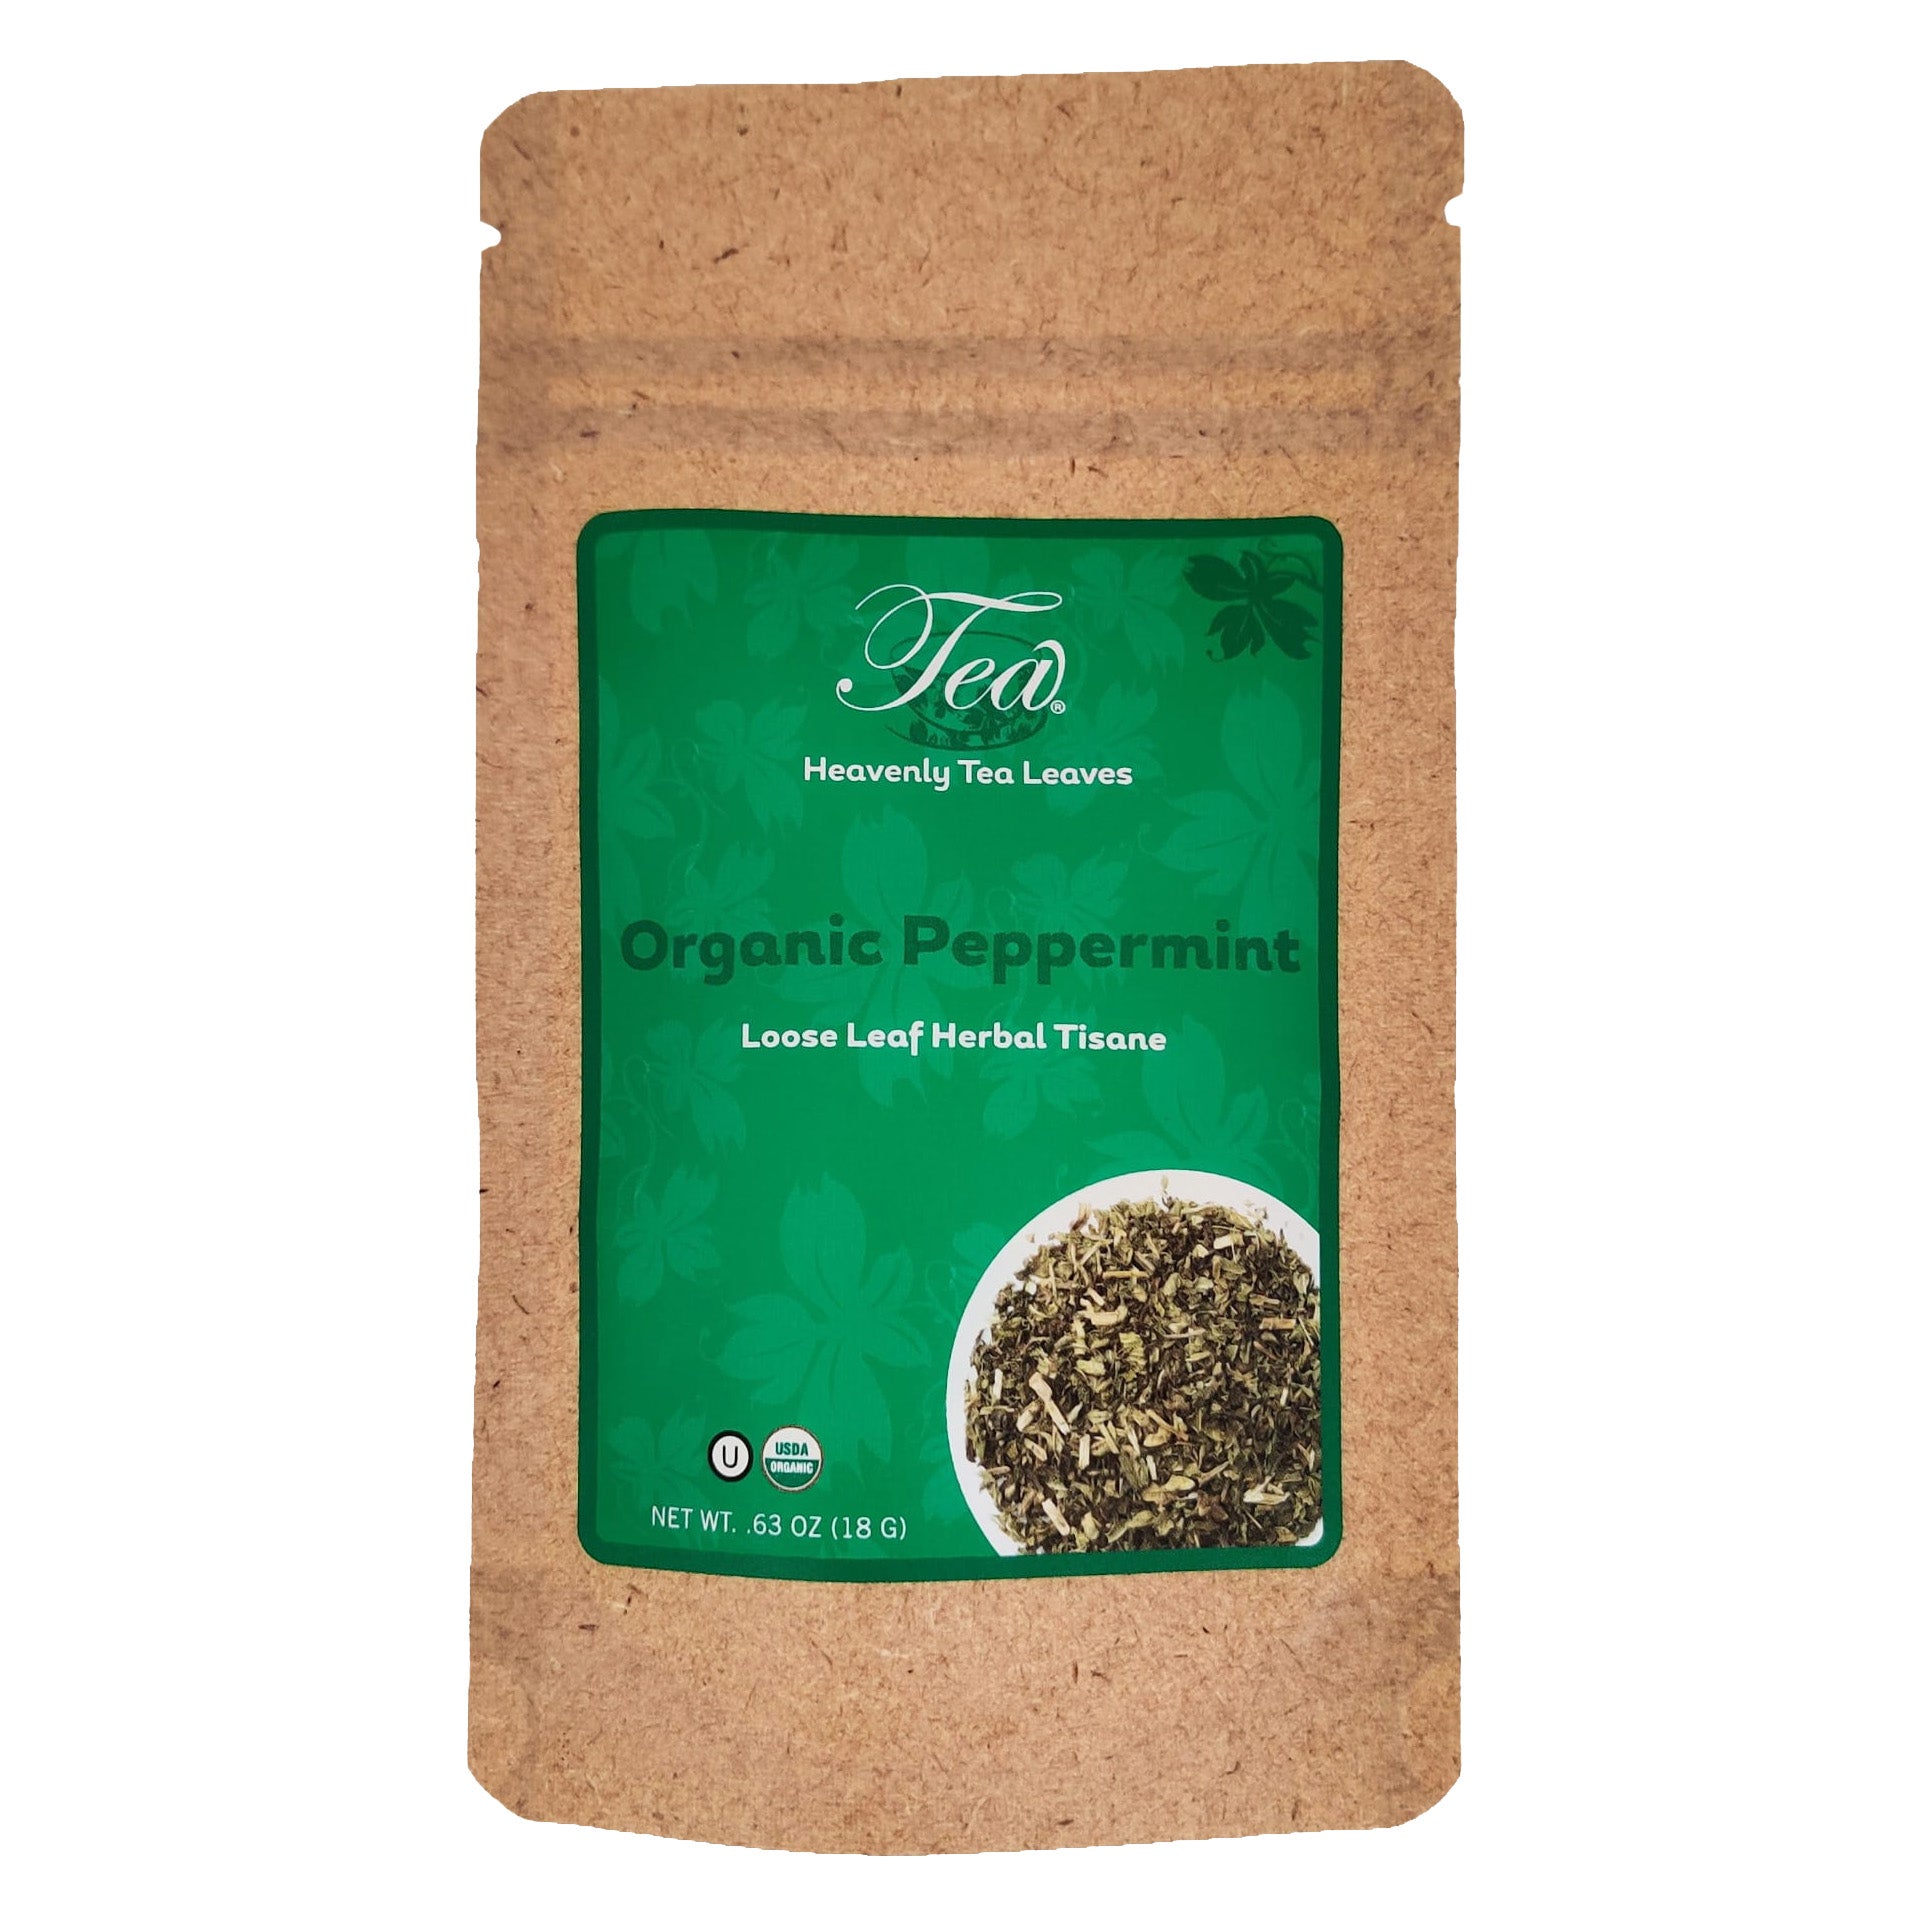 Organic Peppermint, Essentials Collection, .63 Oz. - Premium Loose Leaf Herbal Tisane - USDA Organic & OU Kosher - Compostable Packaging | Heavenly Tea Leaves